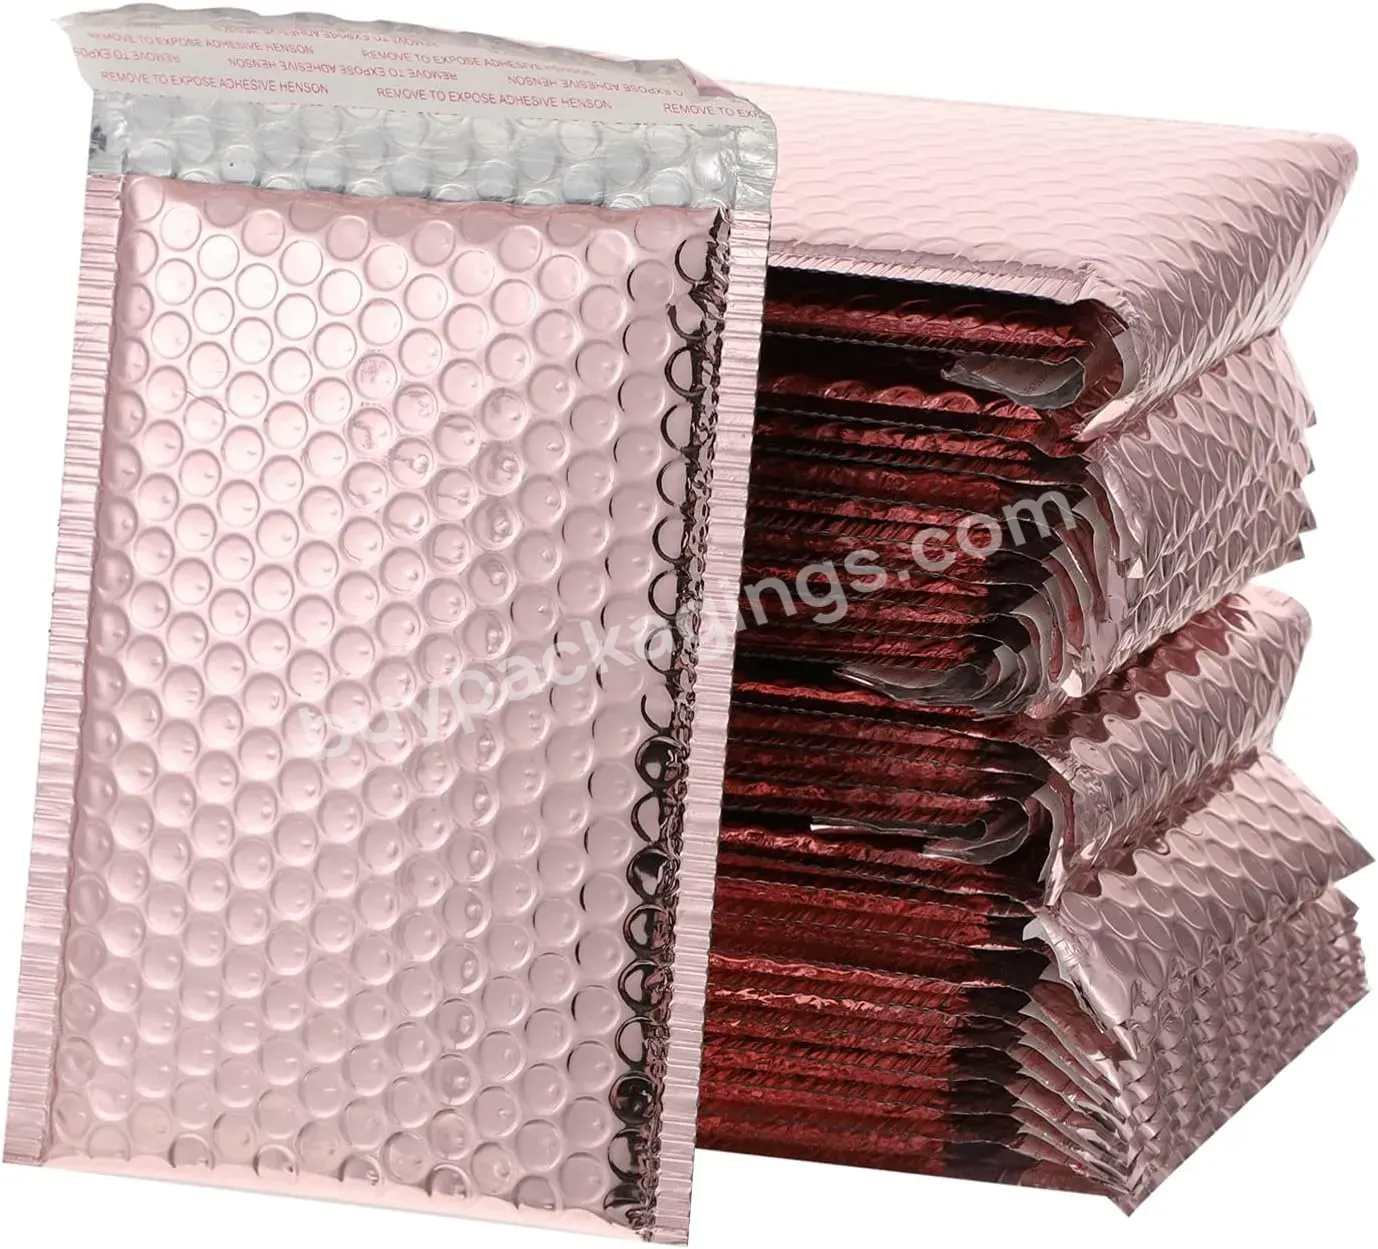 Ctcx Hot Pink Plymor Bubble Mailer Shipping Plastic Mailer Bag Padded Envelopes Holographic Metallic Bubble Packages - Buy Metallic Bags Metallic Bubble Mailer Metallic Gift Bag Metallic Envelope Pink Envelops Metallic Metallic Gold Bubble Mailer,Met